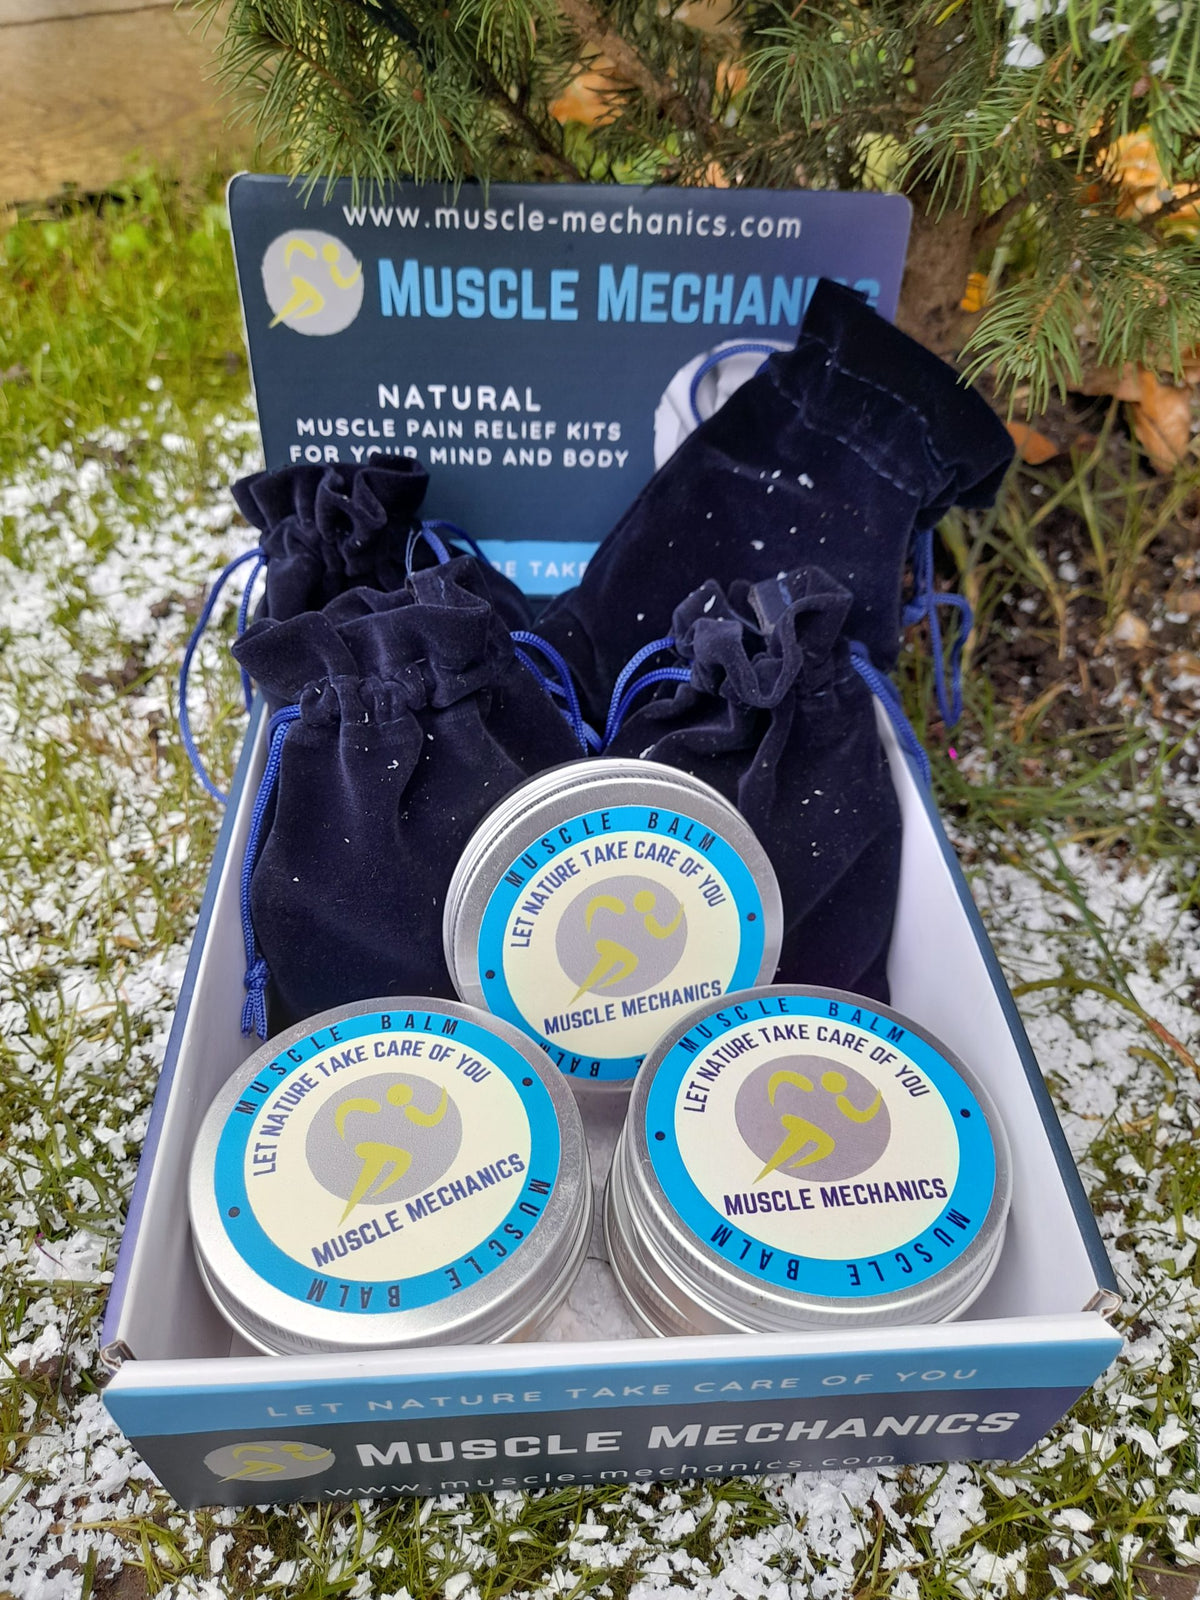 Winter Warmer Muscle Recovery Balm Multipack - 4 Tins